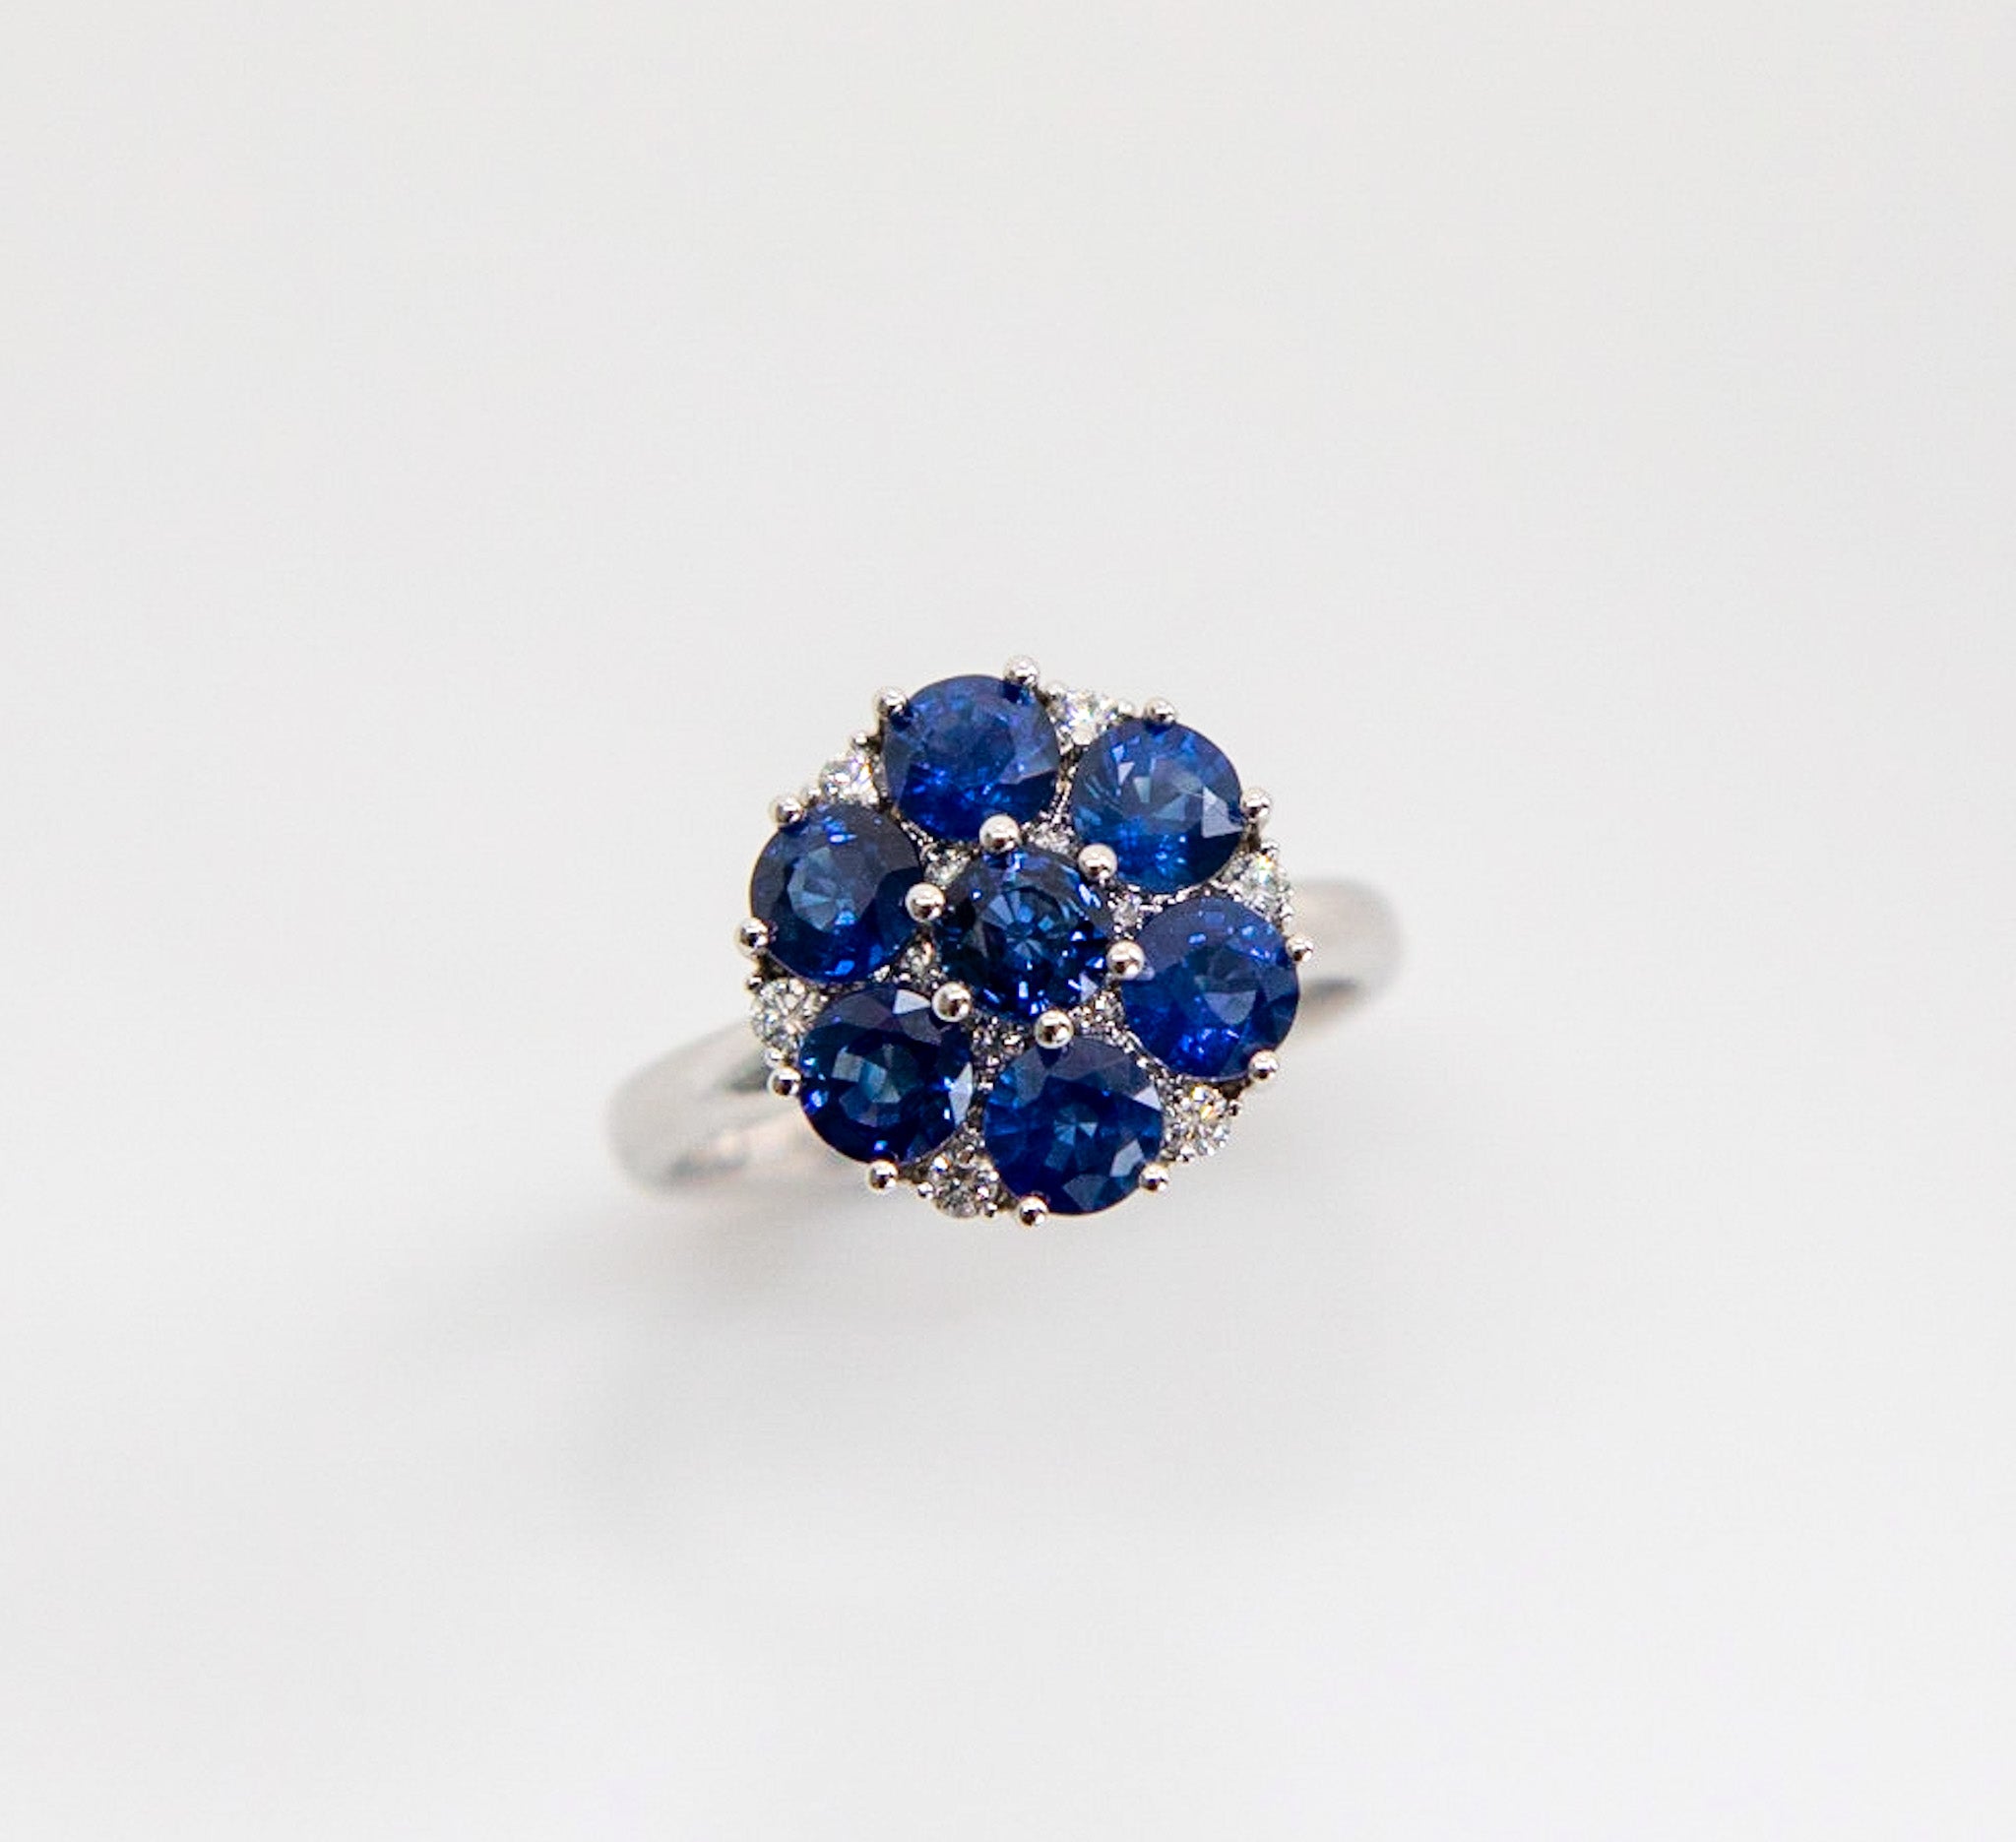 Signature Cluster ring with ornate gallery setting.

2.23ct Ceylon Round Sapphires in Vivid Blue hue.
0.13ct Round Brilliant Diamonds, 12 in total, G colour and VS clarity.

Set in 18K White Gold. 

Ring size US6, can be resized prior to shipping. 